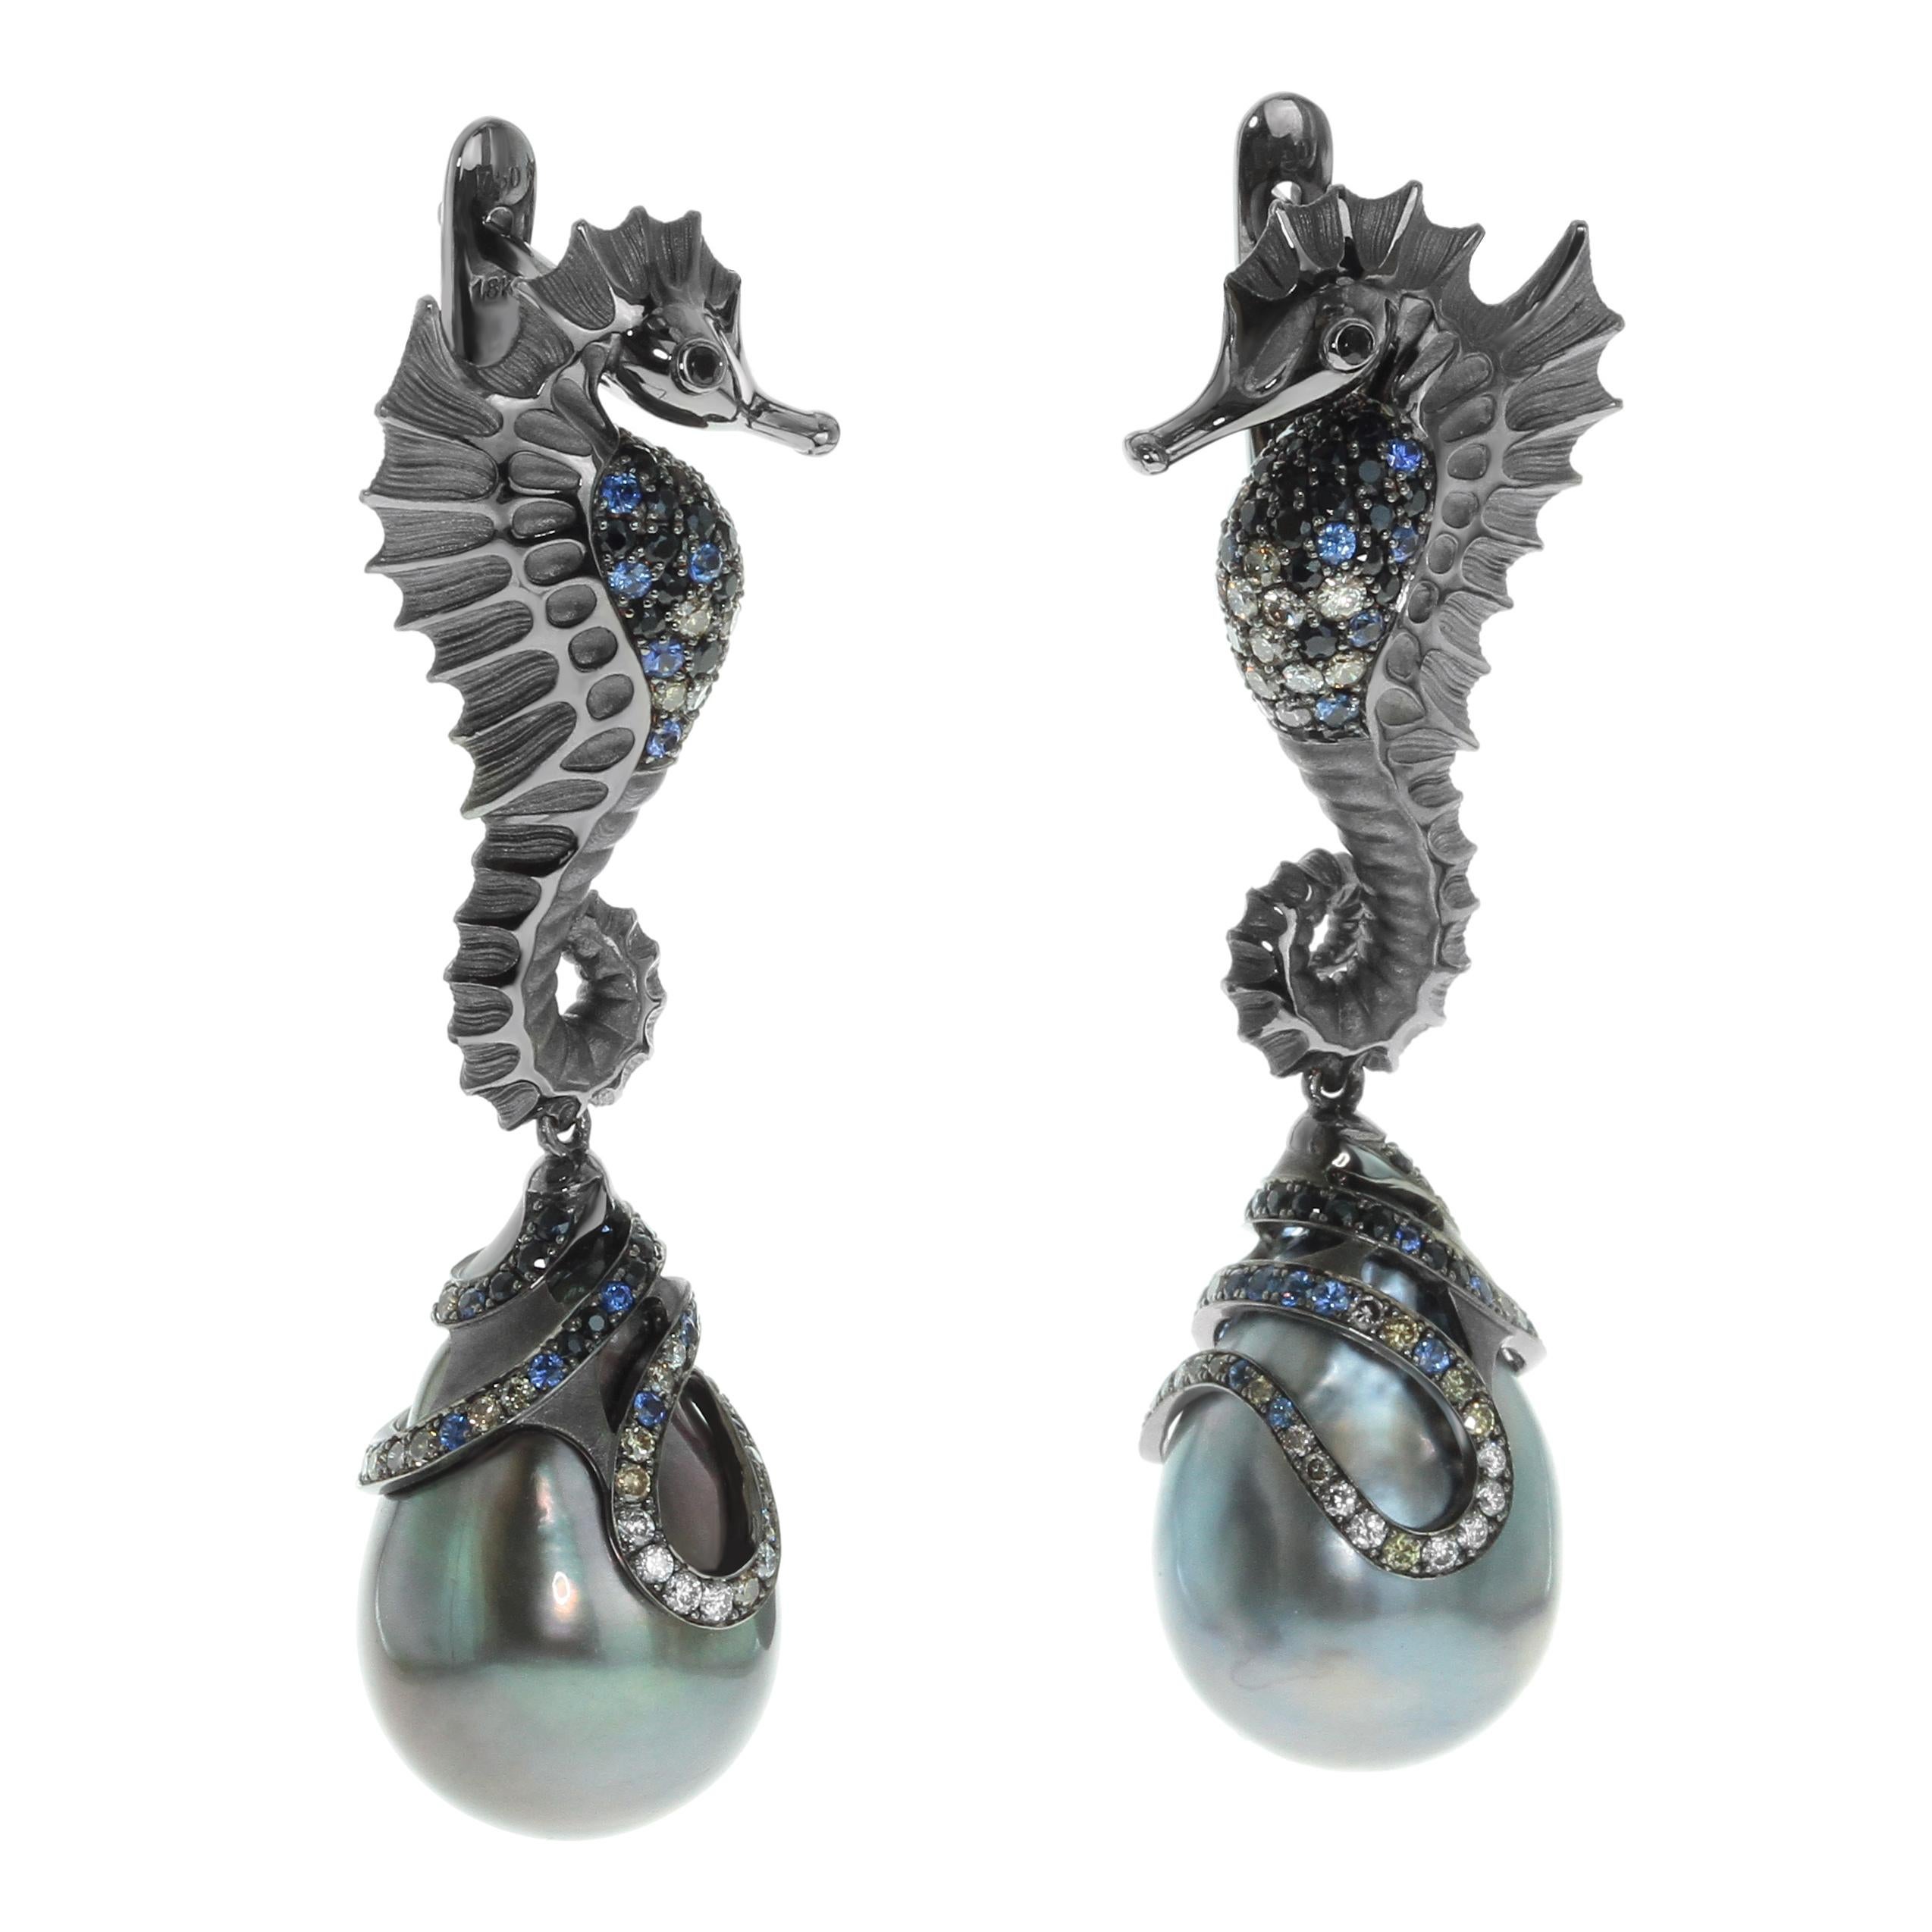 Diamond Sapphire Tahiti Pearl 18 Karat Black Gold Seahorse Earrings

Did You ever seen the mystycal deepness of the ocean? Did You ever meet inhabitants of it? Mousson Atelier will opend this part of unseen especially for You! Gorgeous Seahorse